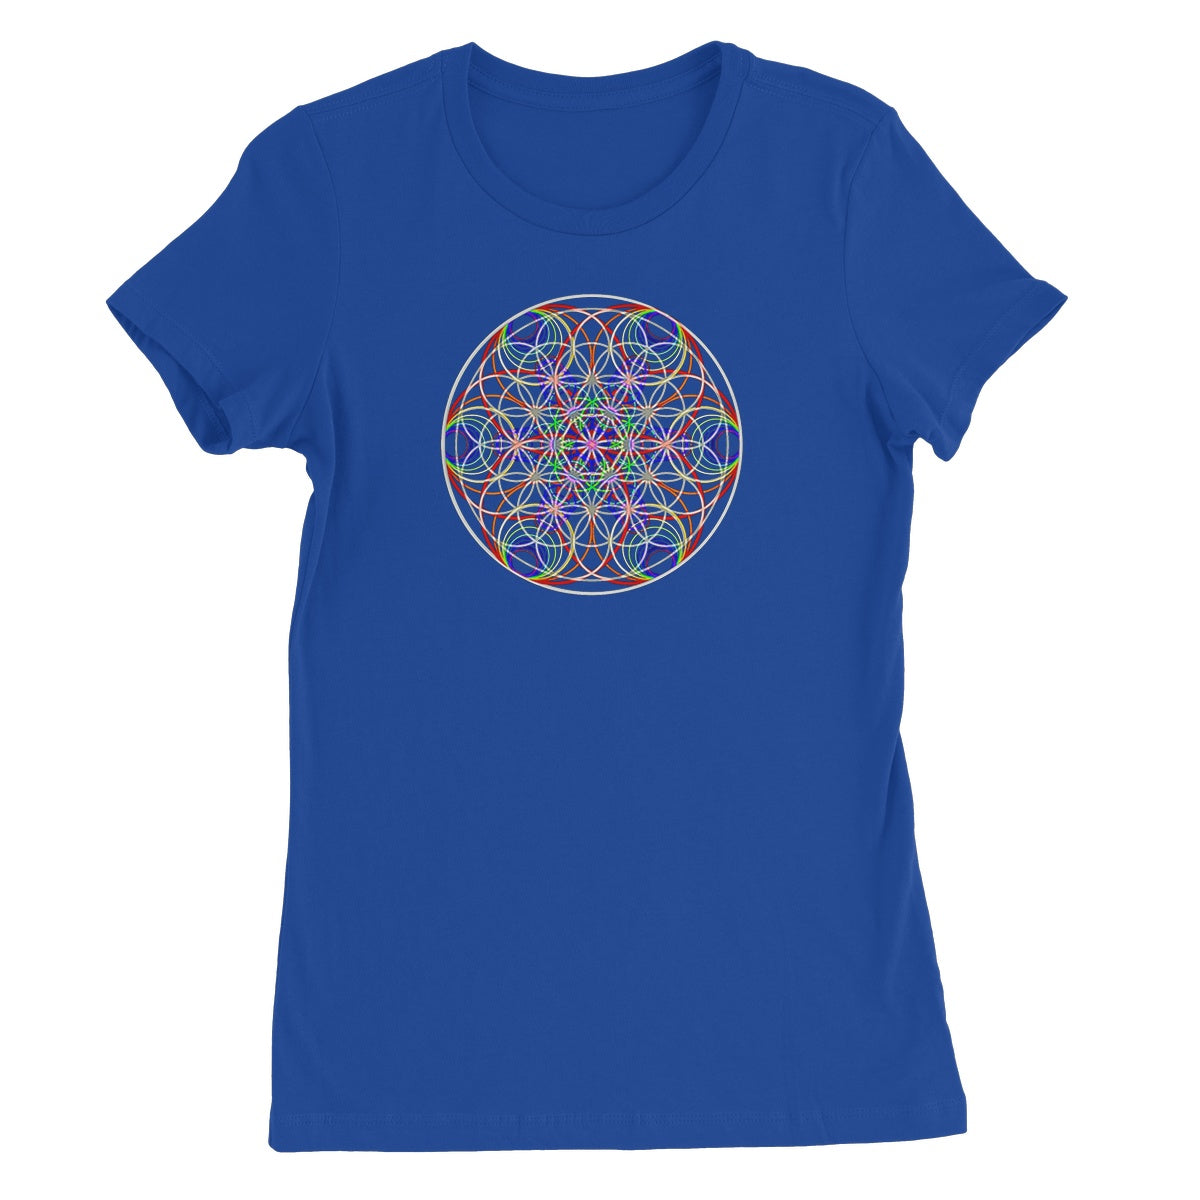 The Sound of the Flower of Life Women's Favourite T-Shirt